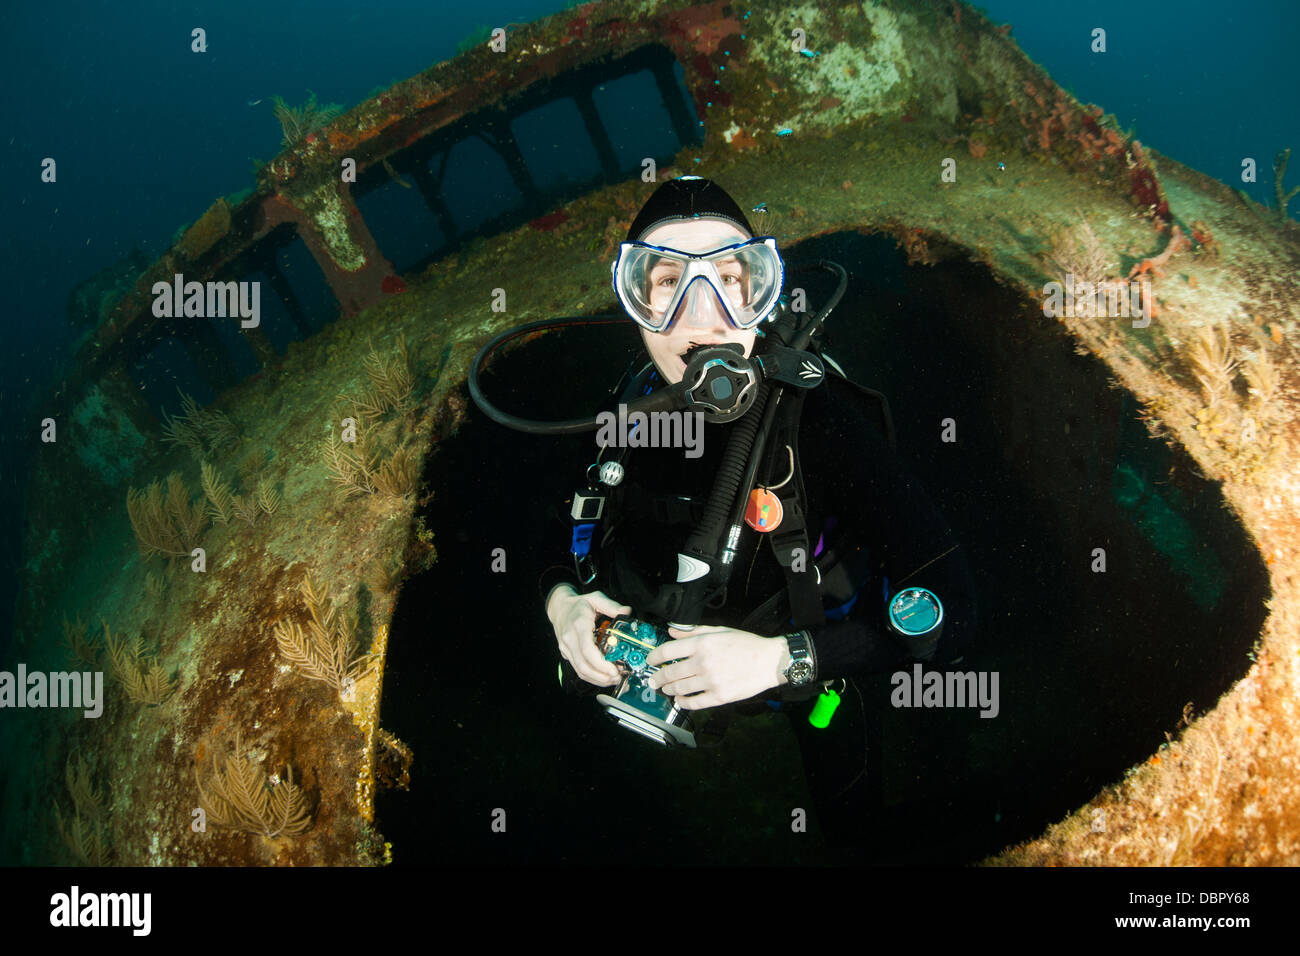 Scuba diver emerging from the wreck of the Mr. Bud, a former shrimping boat, scuttled off the island of Roatan, Honduras Stock Photo